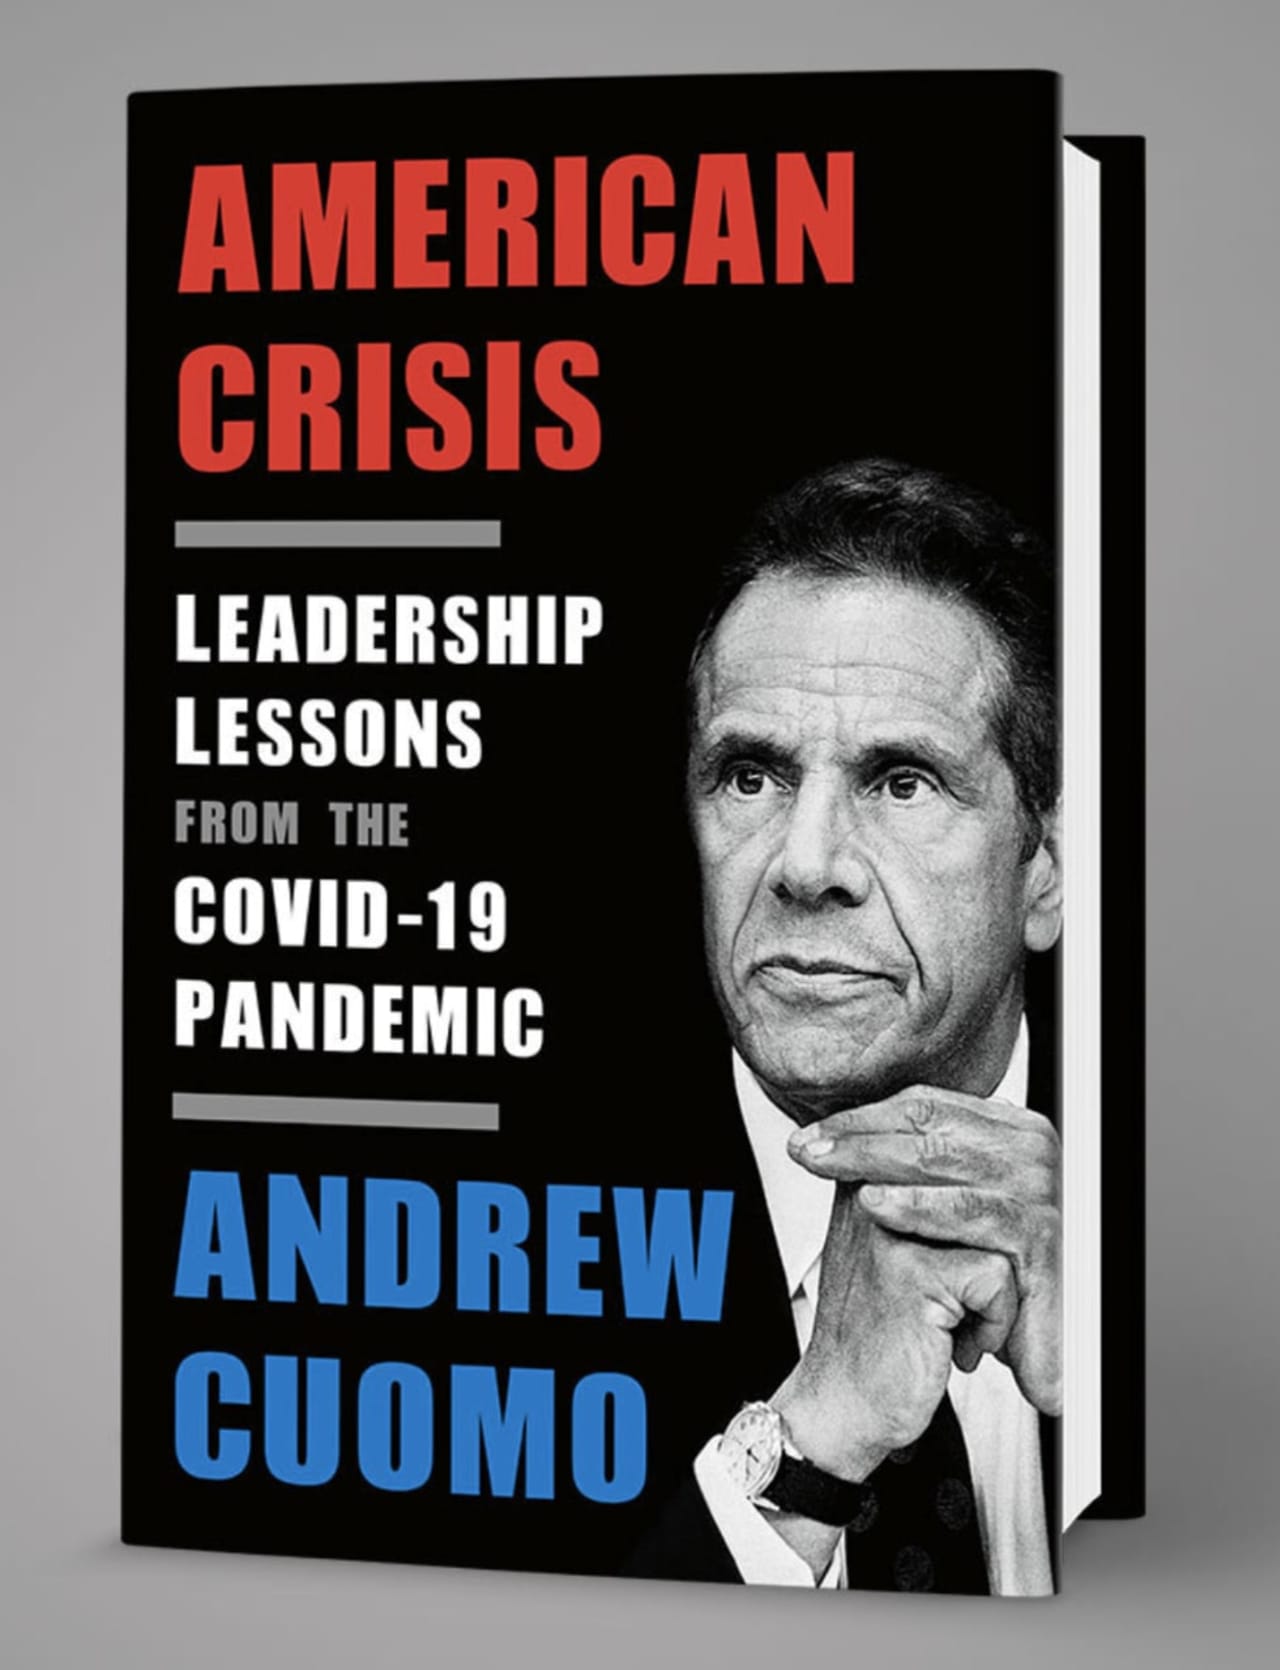 New York Gov. Andrew Cuomo announced he is publishing a book about the state's response to COVID-19.